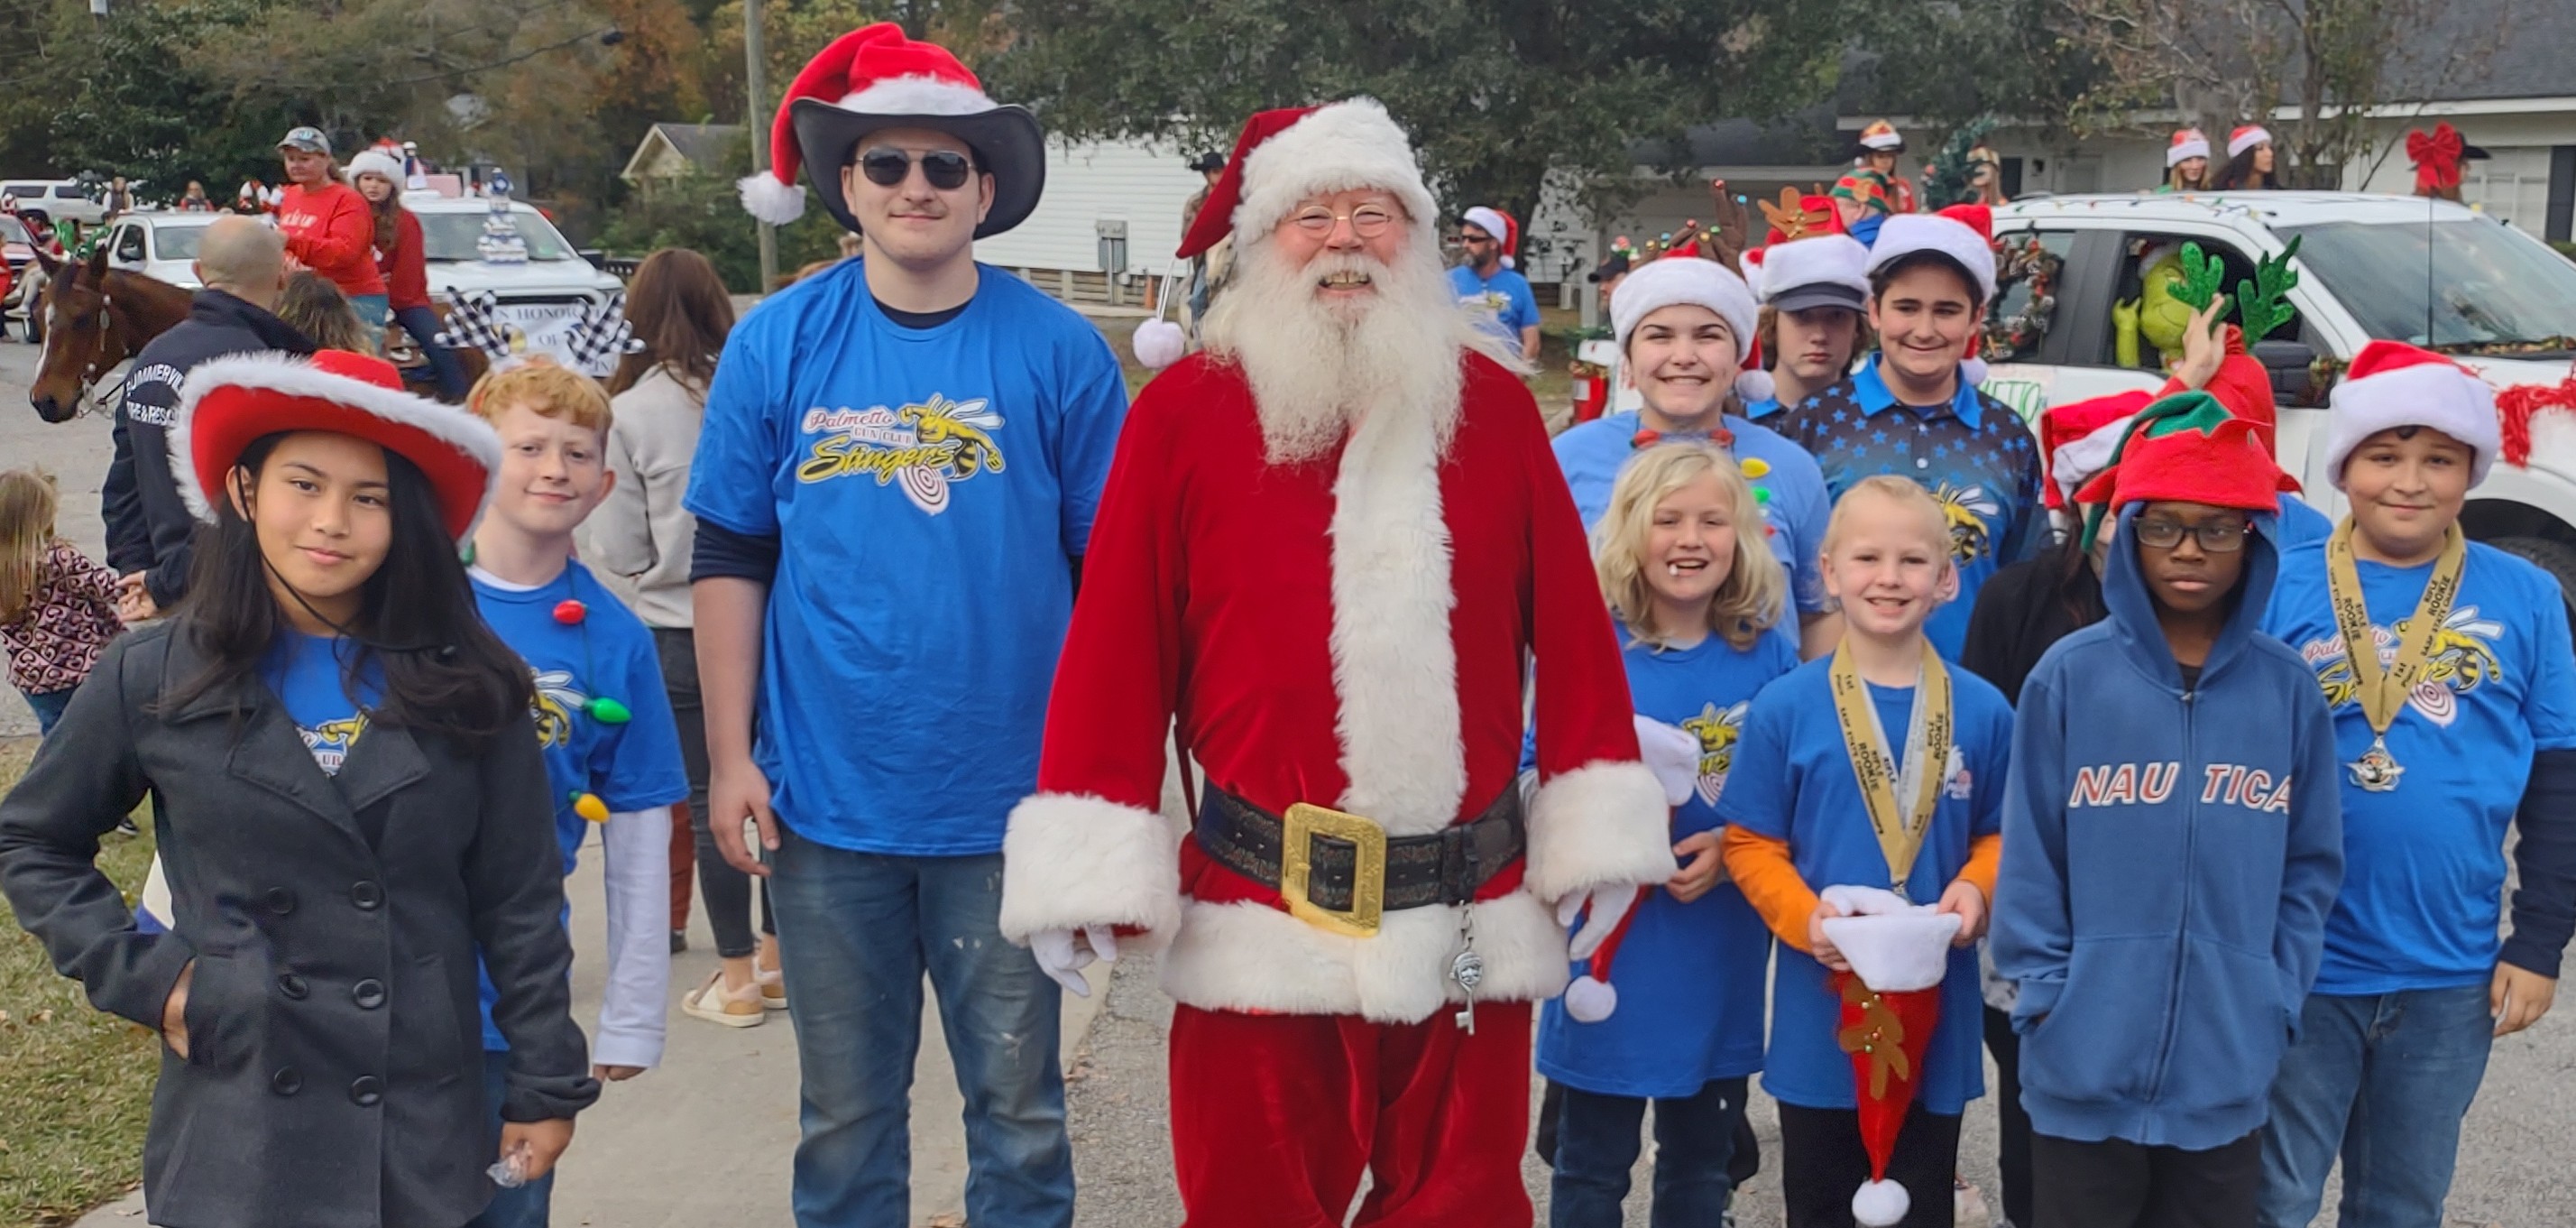 PGC youth with Santa in the Summerville Christmas Parade